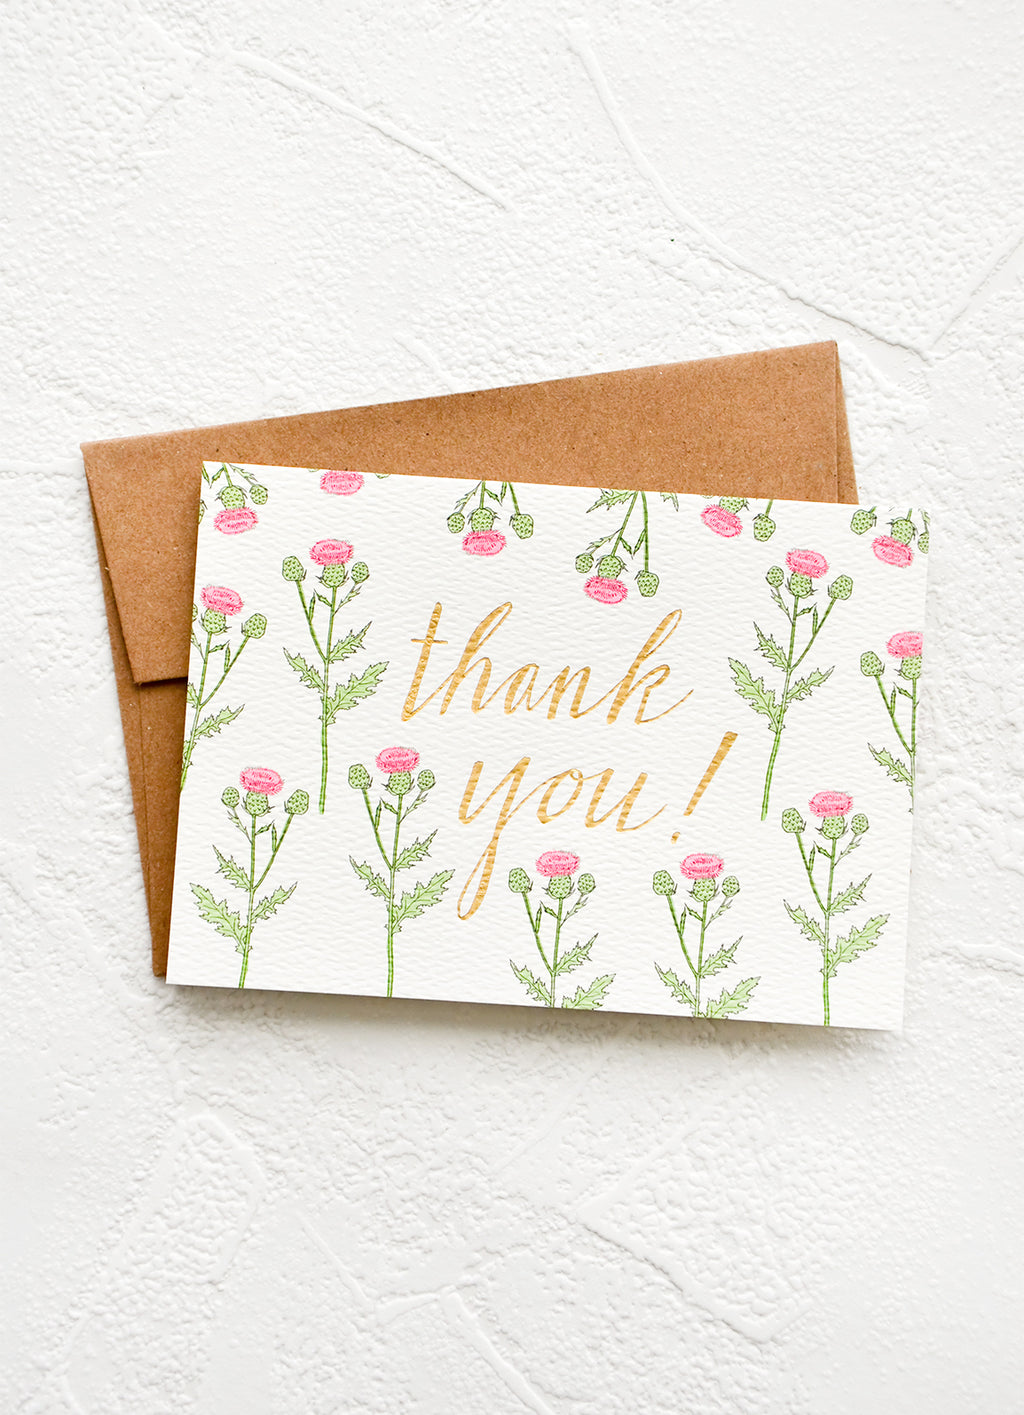 2: Thistle printed thank you card with gold letters, paired with kraft envelope.